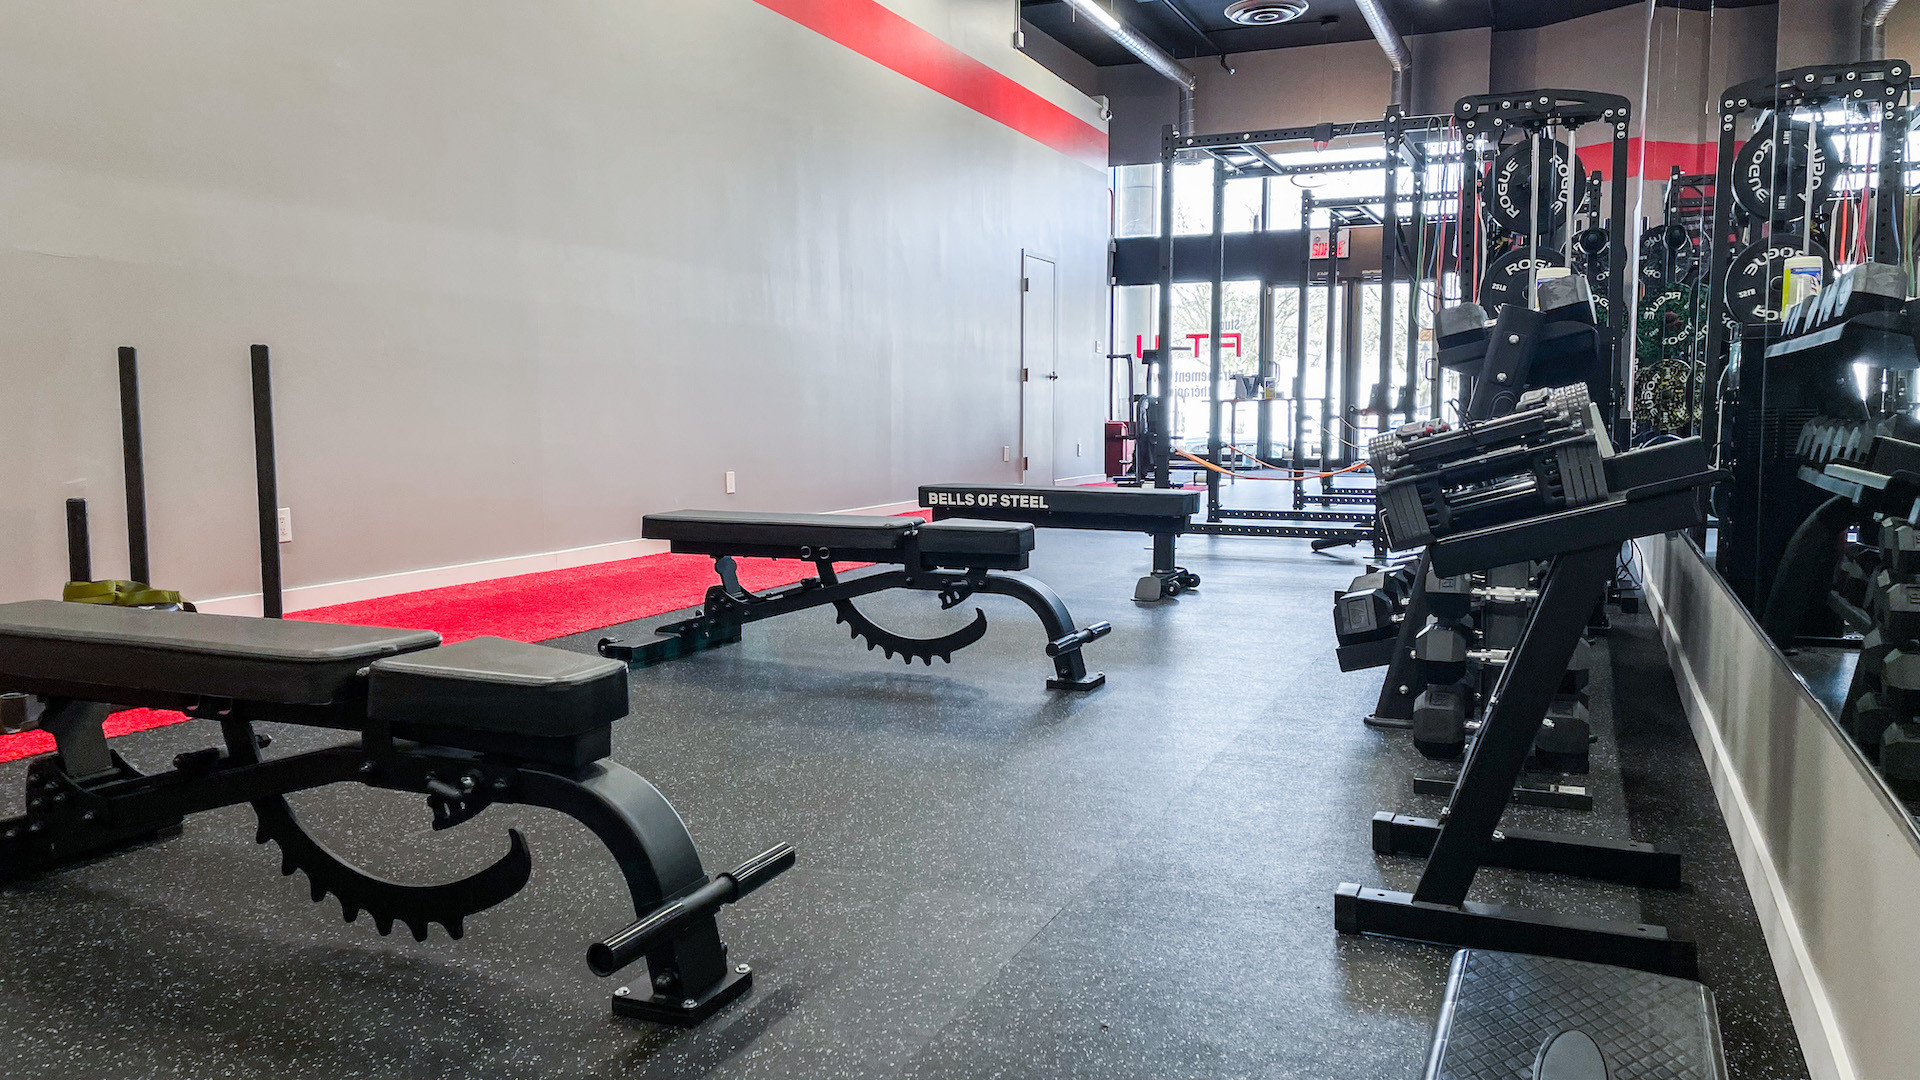 If you're looking for a good gym to work out in, you've come to the right place. We did extensive research on the best gyms in Westmount, Montreal, and found Studio Fit U, at the top of our list. In this article, we are going to introduce you to the ten best gyms in Westmount. Whether you are a beginner or a professional, you will surely find a place that will meet all your needs.